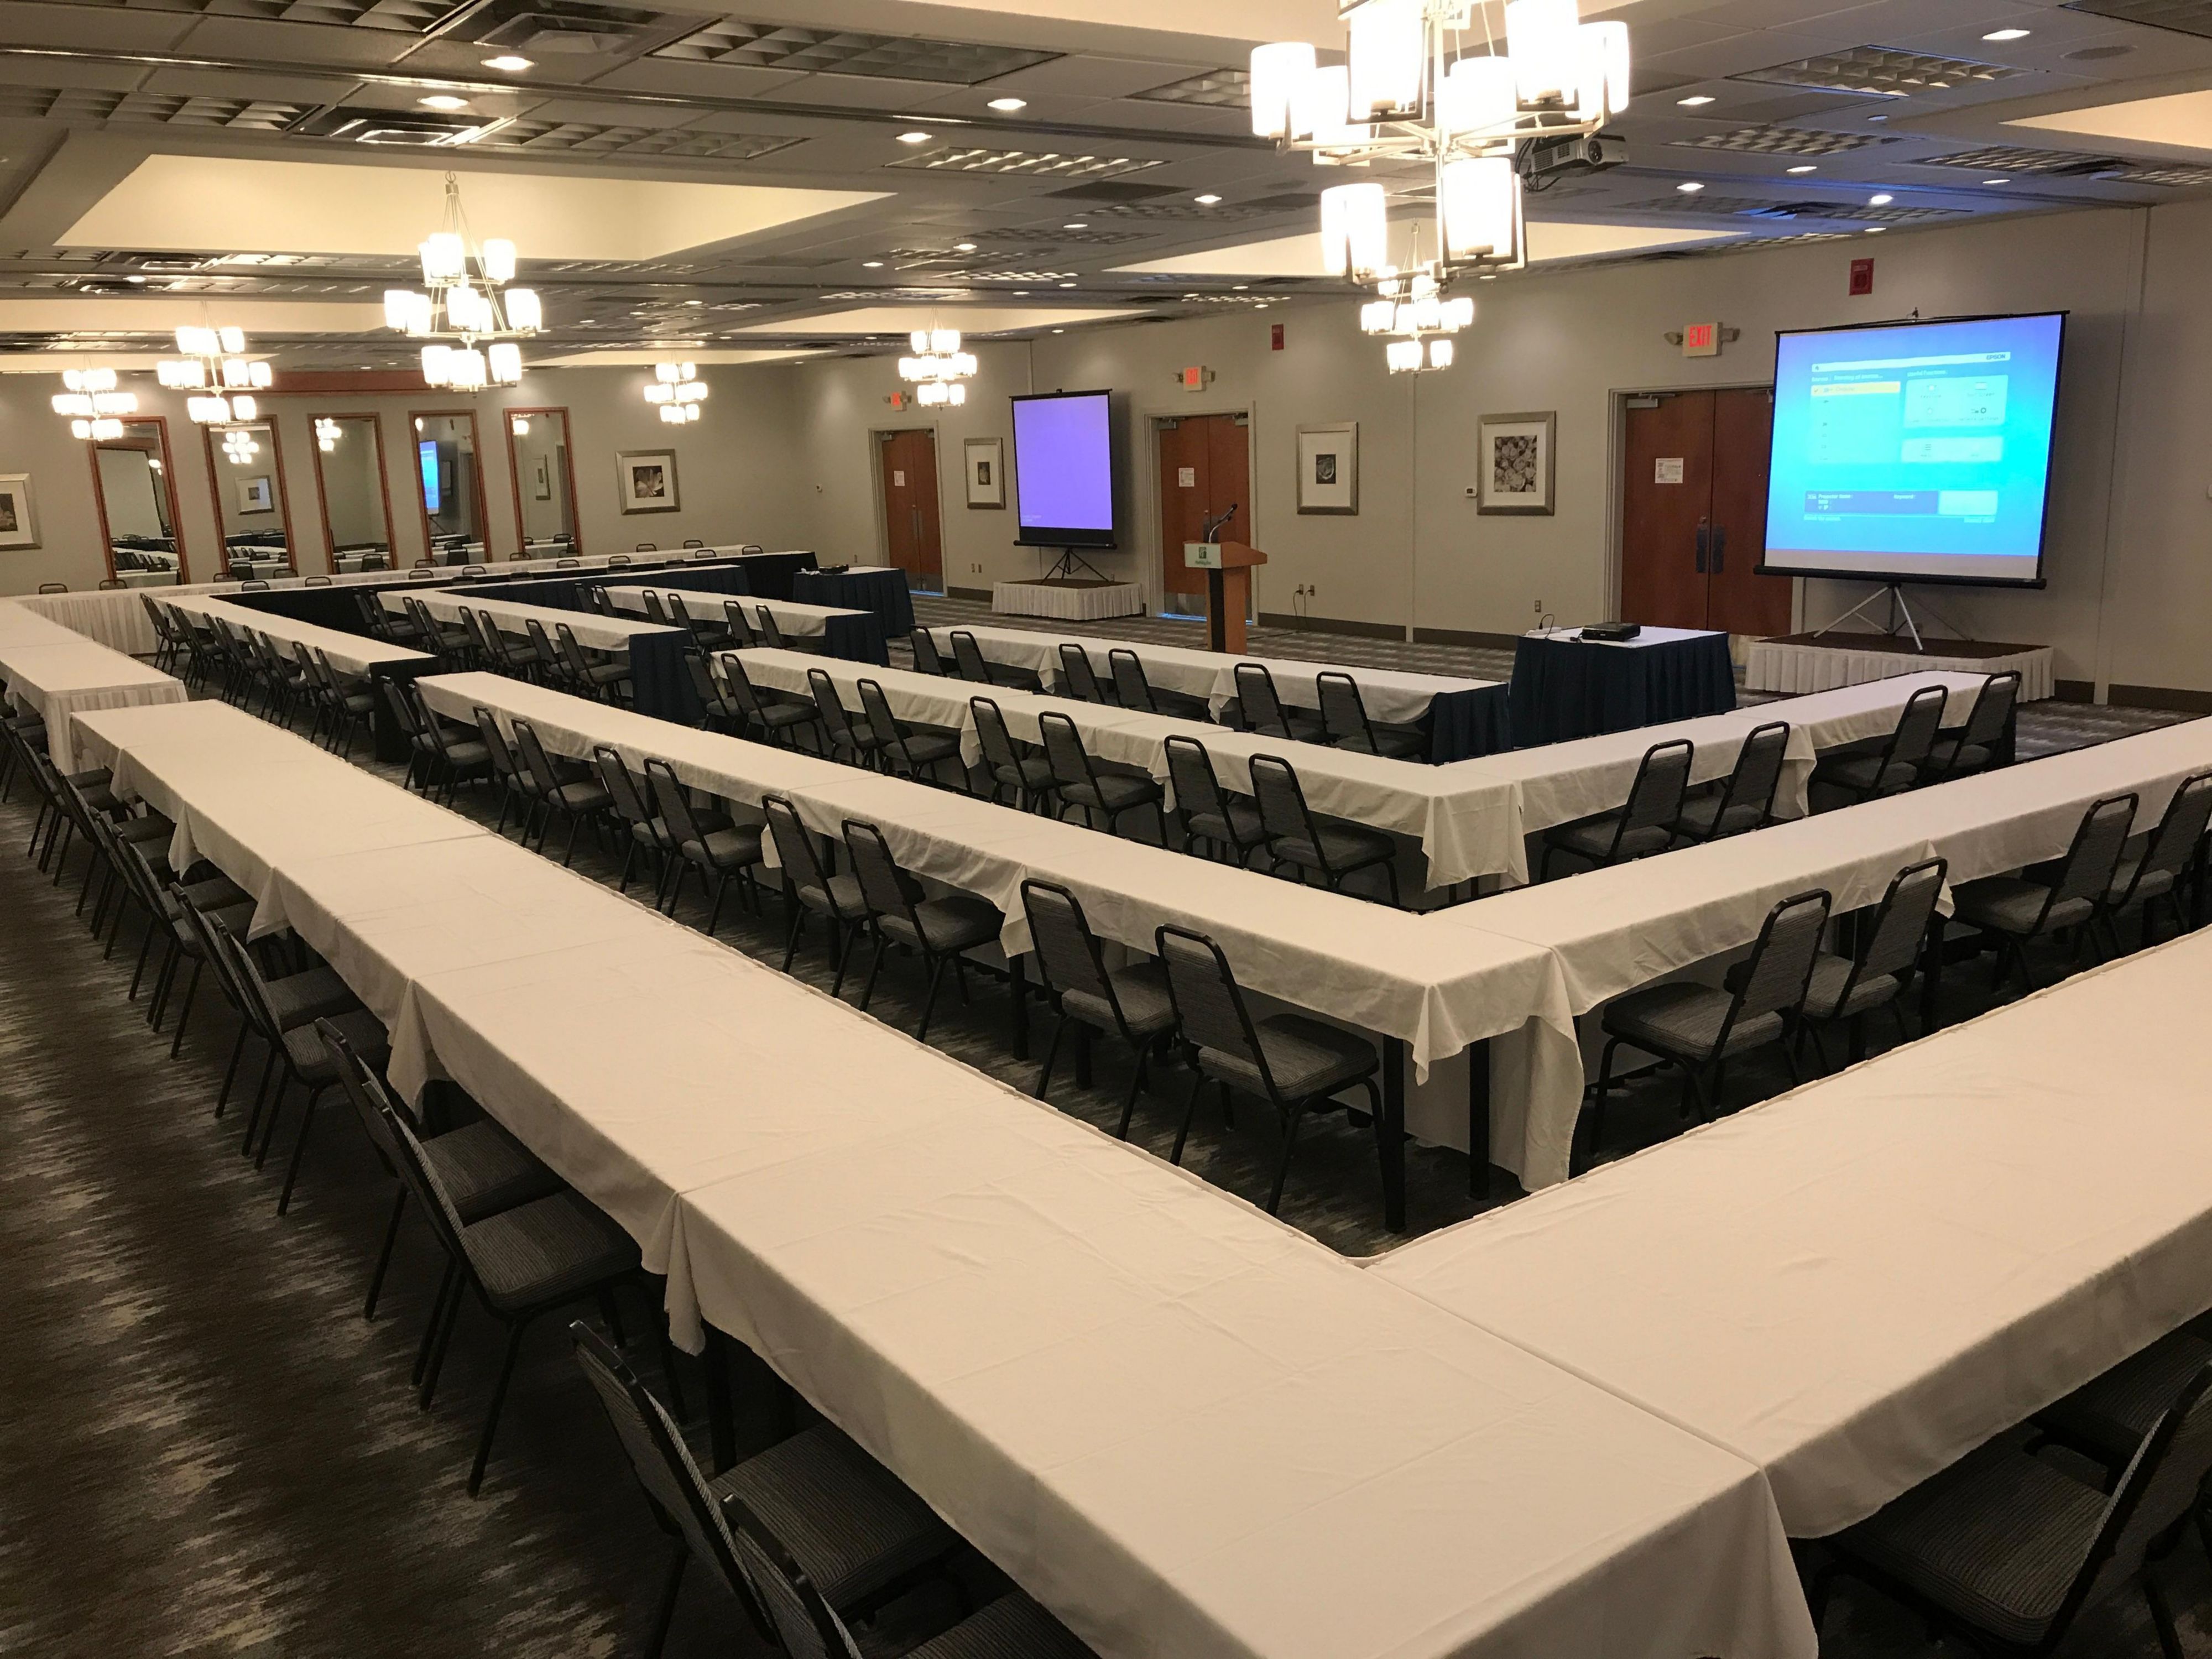 The Holiday Inn Martinsburg is a full-service, newly renovated facility equipped to host your business meeting; convention; wedding; baby shower or holiday event! 
Groups from 20 to 300. Easy access from I-81 - centrally located between Virginia and Maryland.